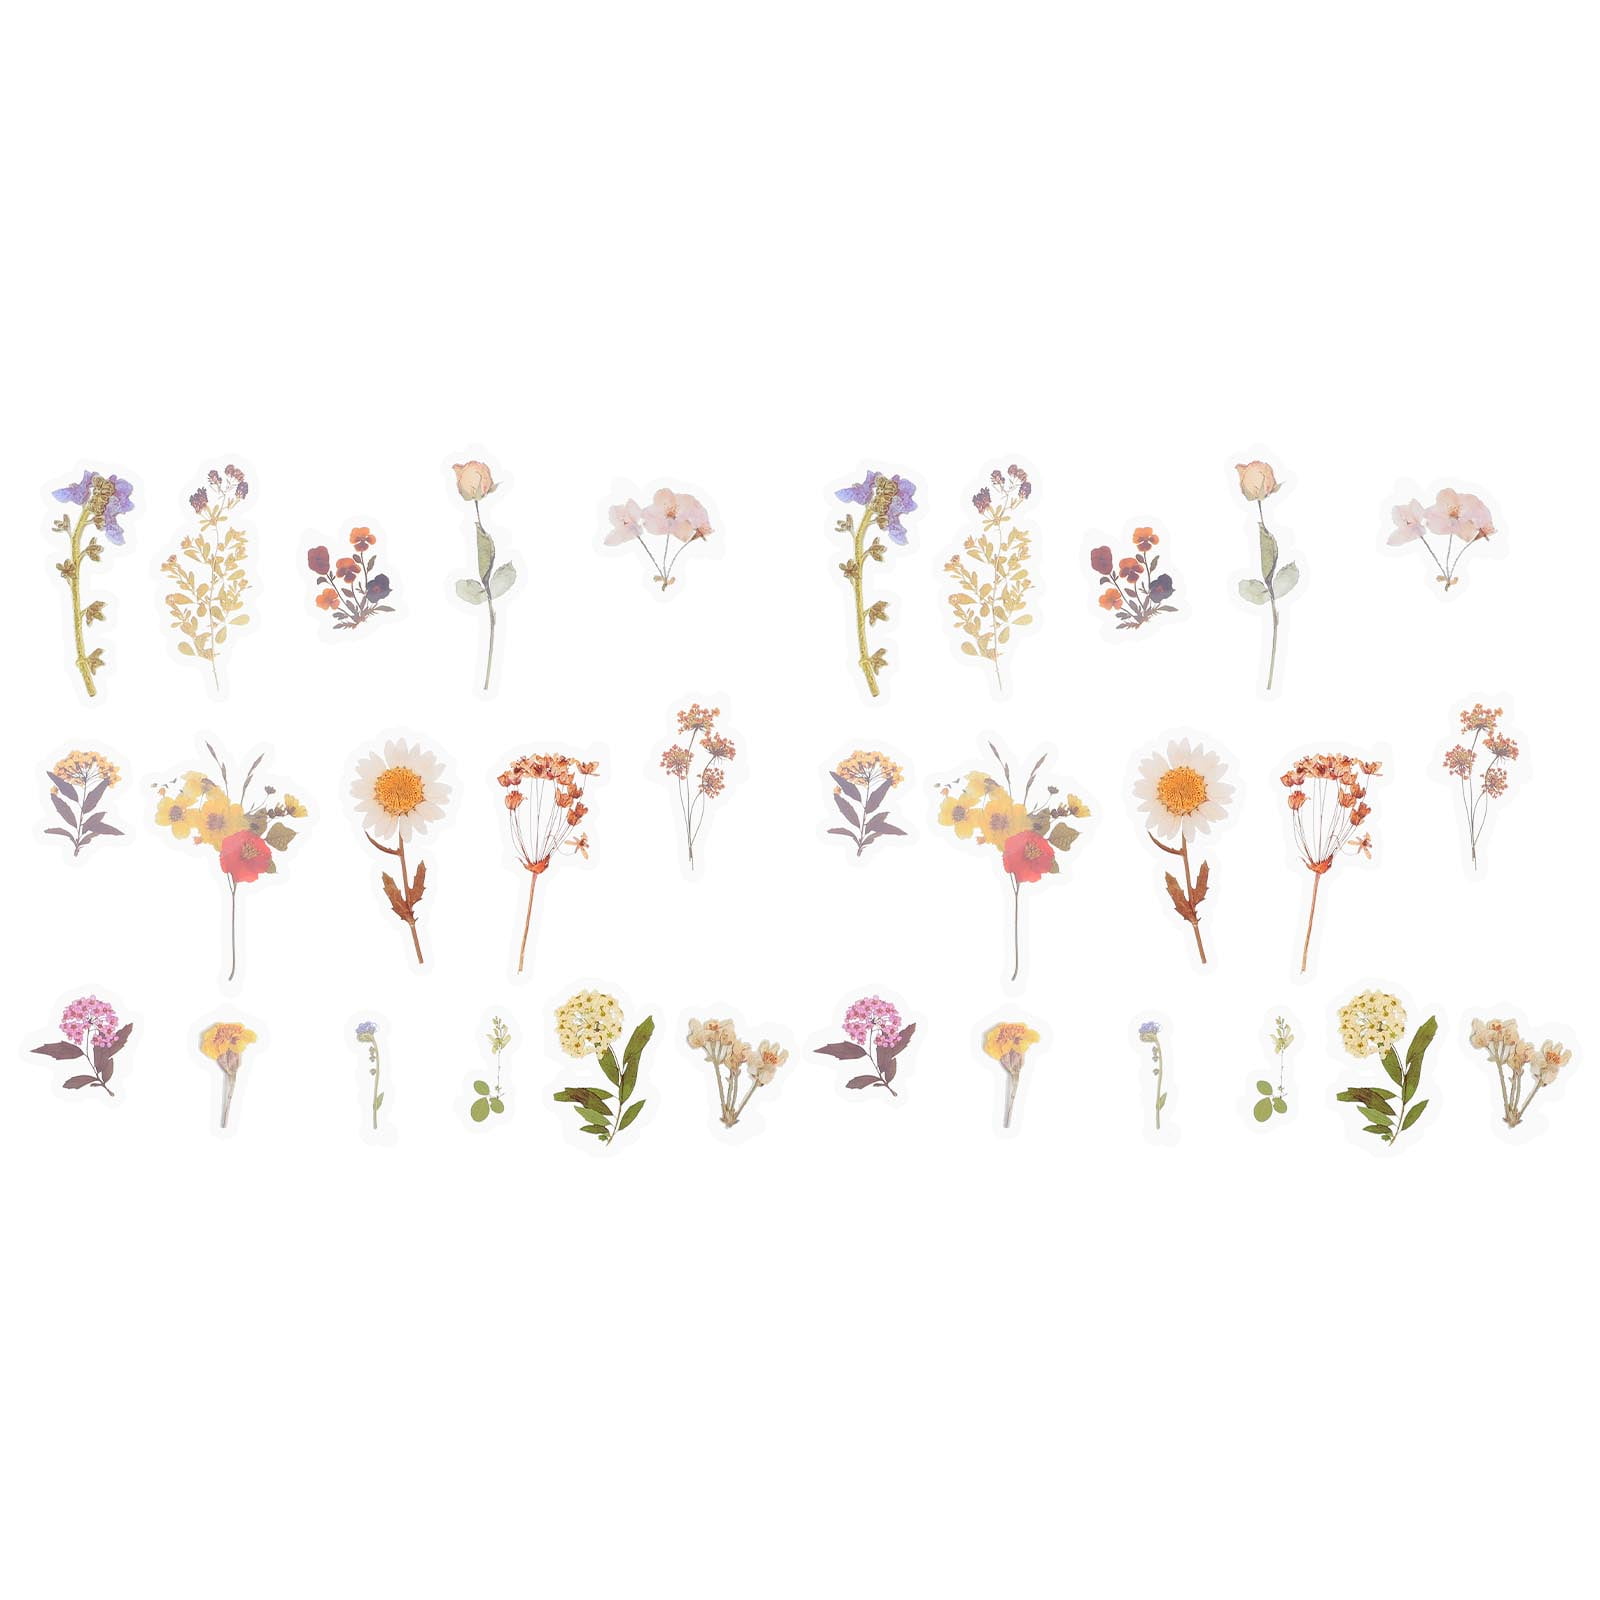 Mini Flowers Sticker Book - Aesthetic Stickers for Scrapbooking